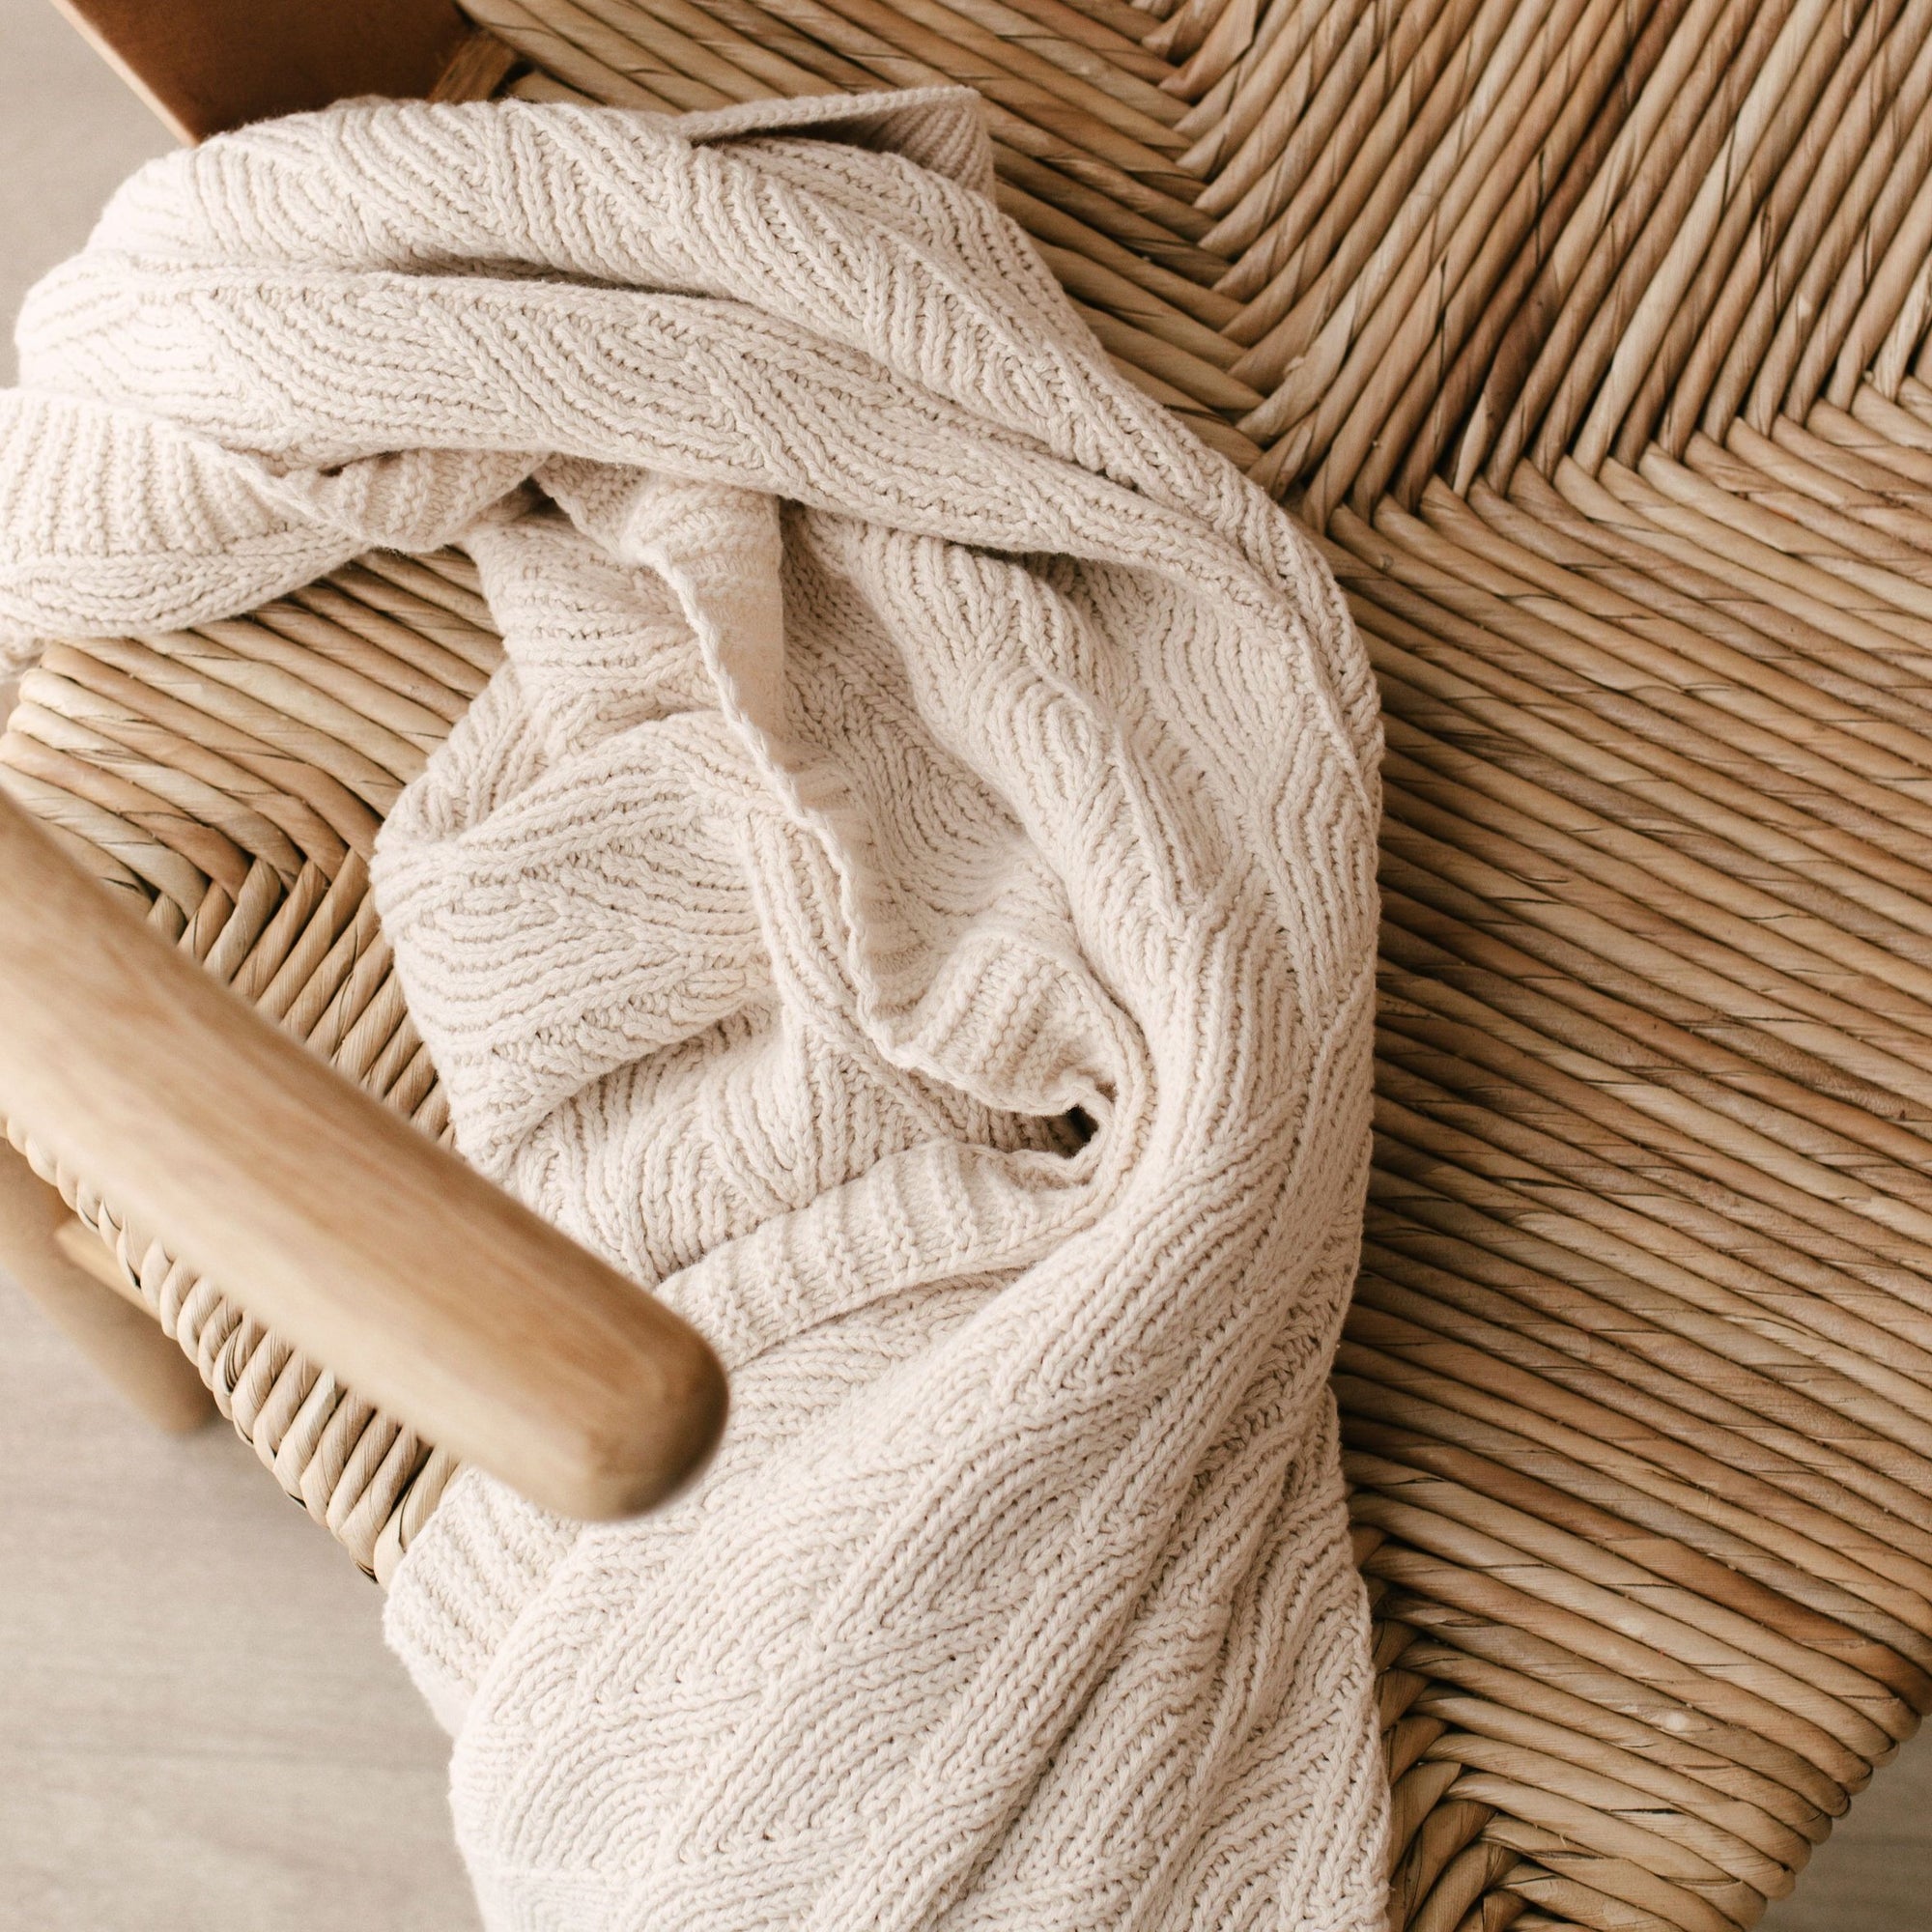 A Bundl. organic cotton blanket is sitting on a wooden chair.